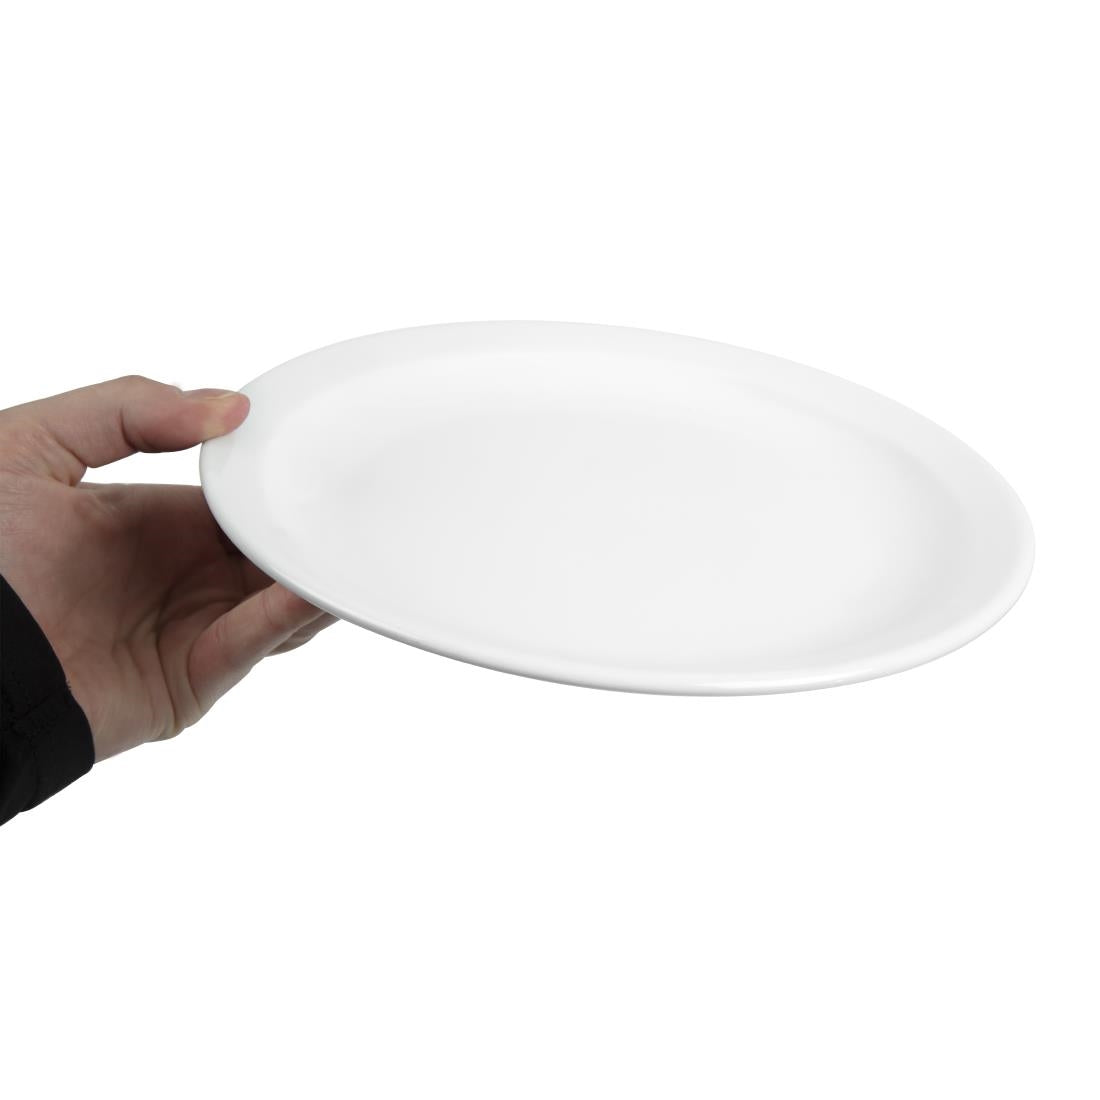 CB490 Olympia Whiteware Narrow Rimmed Plates 250mm (Pack of 12)